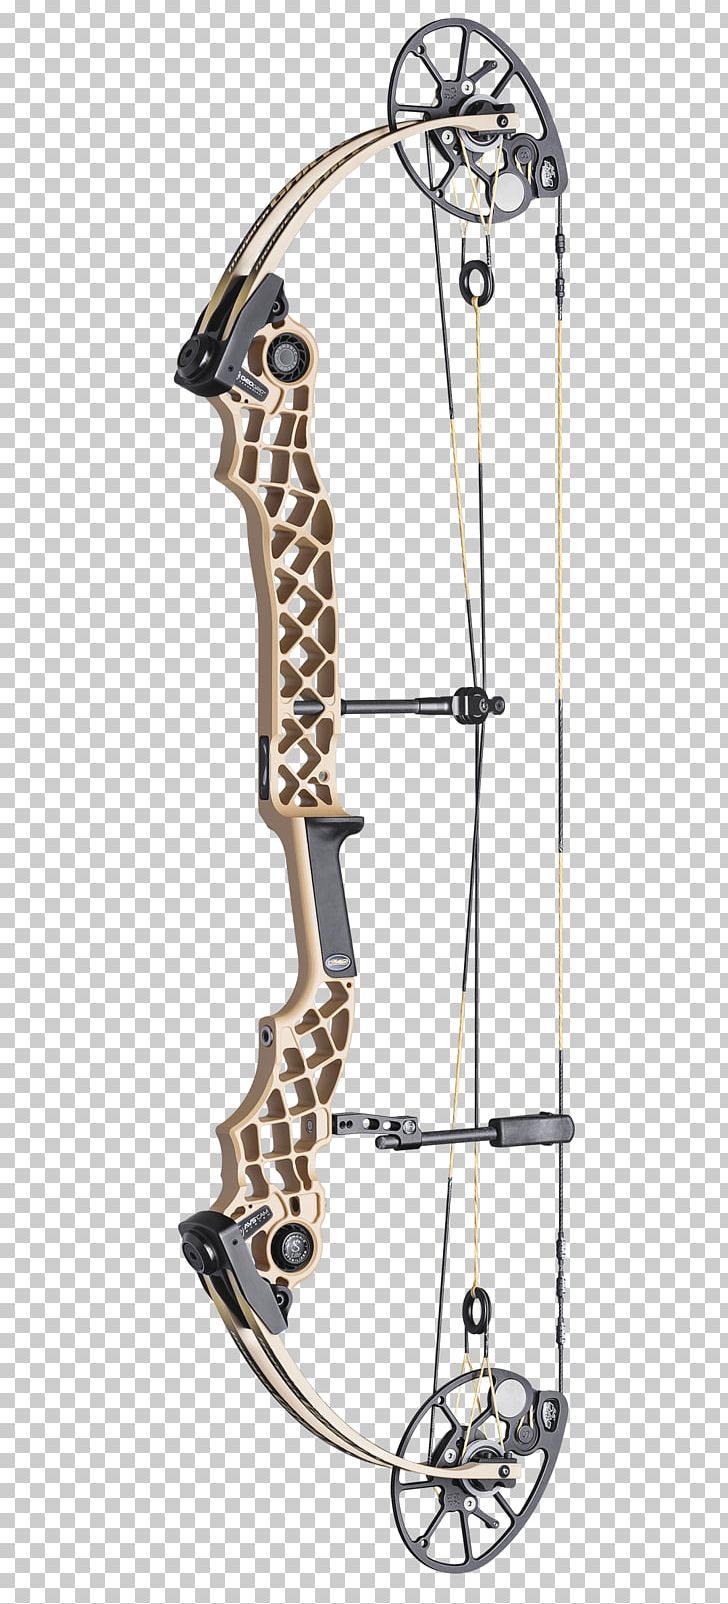 Compound Bows Bow And Arrow Archery Hunting PNG, Clipart, Archery, Arrow, Axle, Bow, Bow And Arrow Free PNG Download